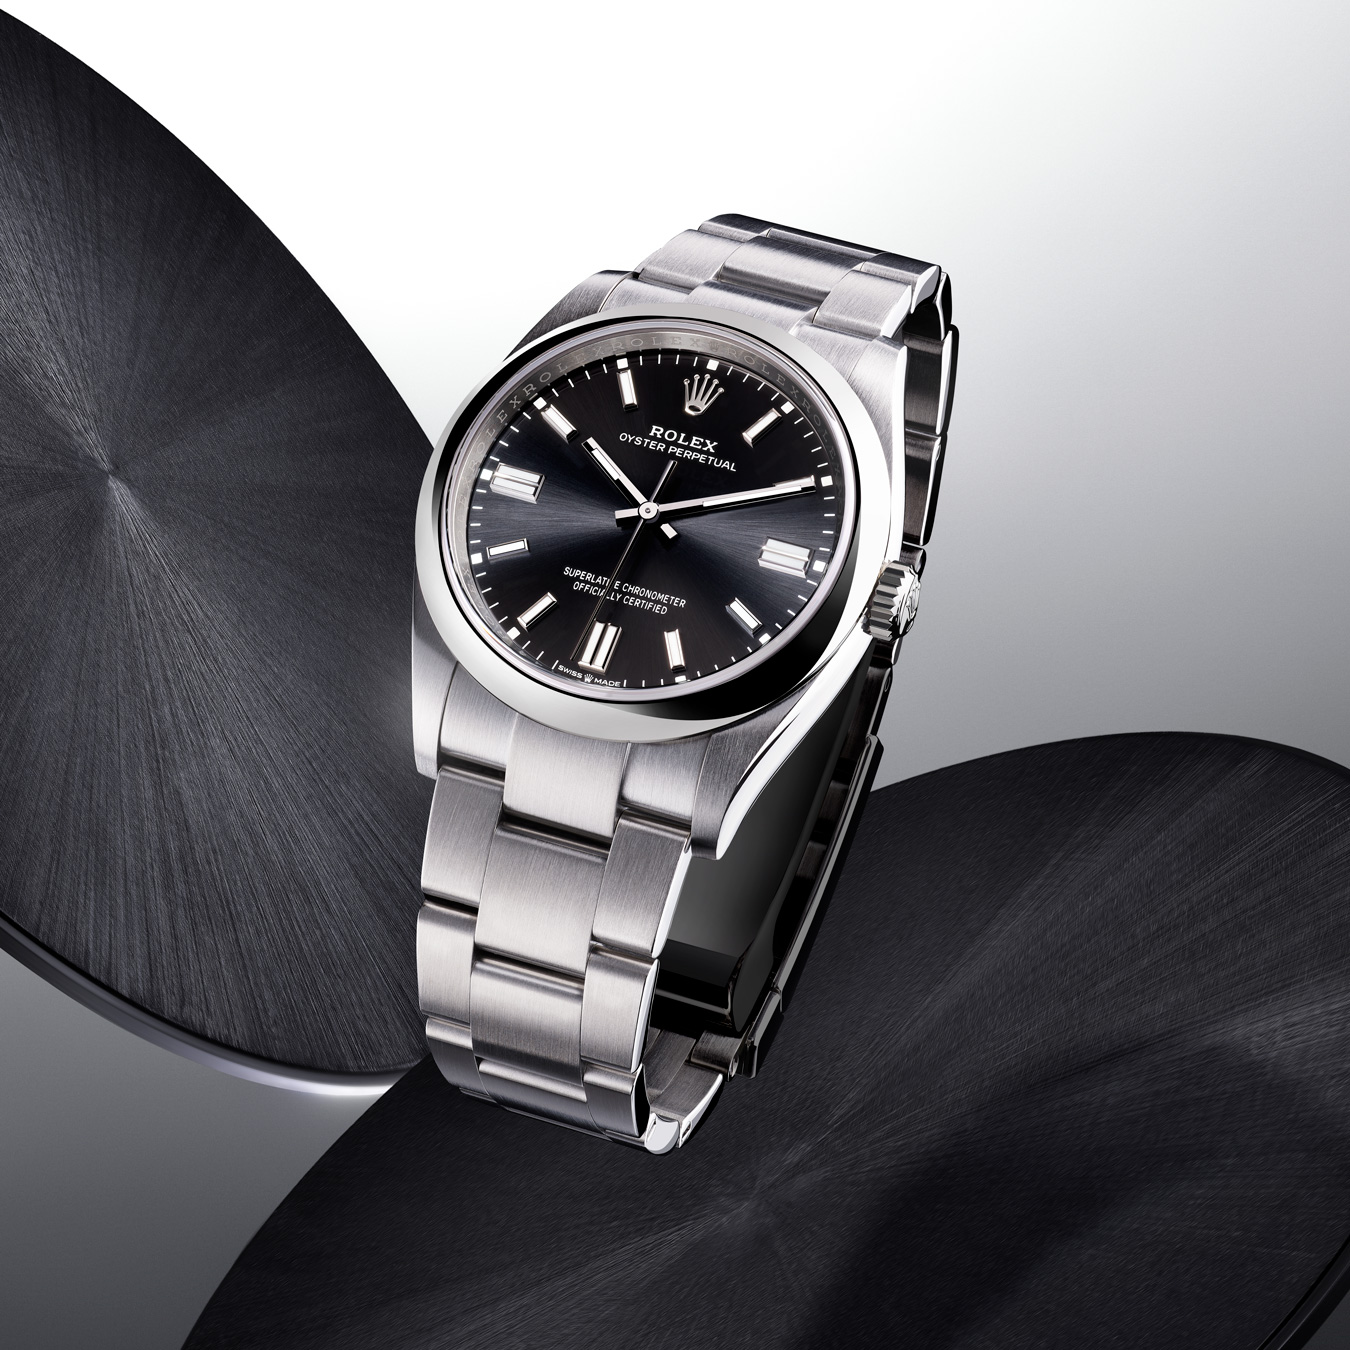 The Rolex Oyster Perpetual